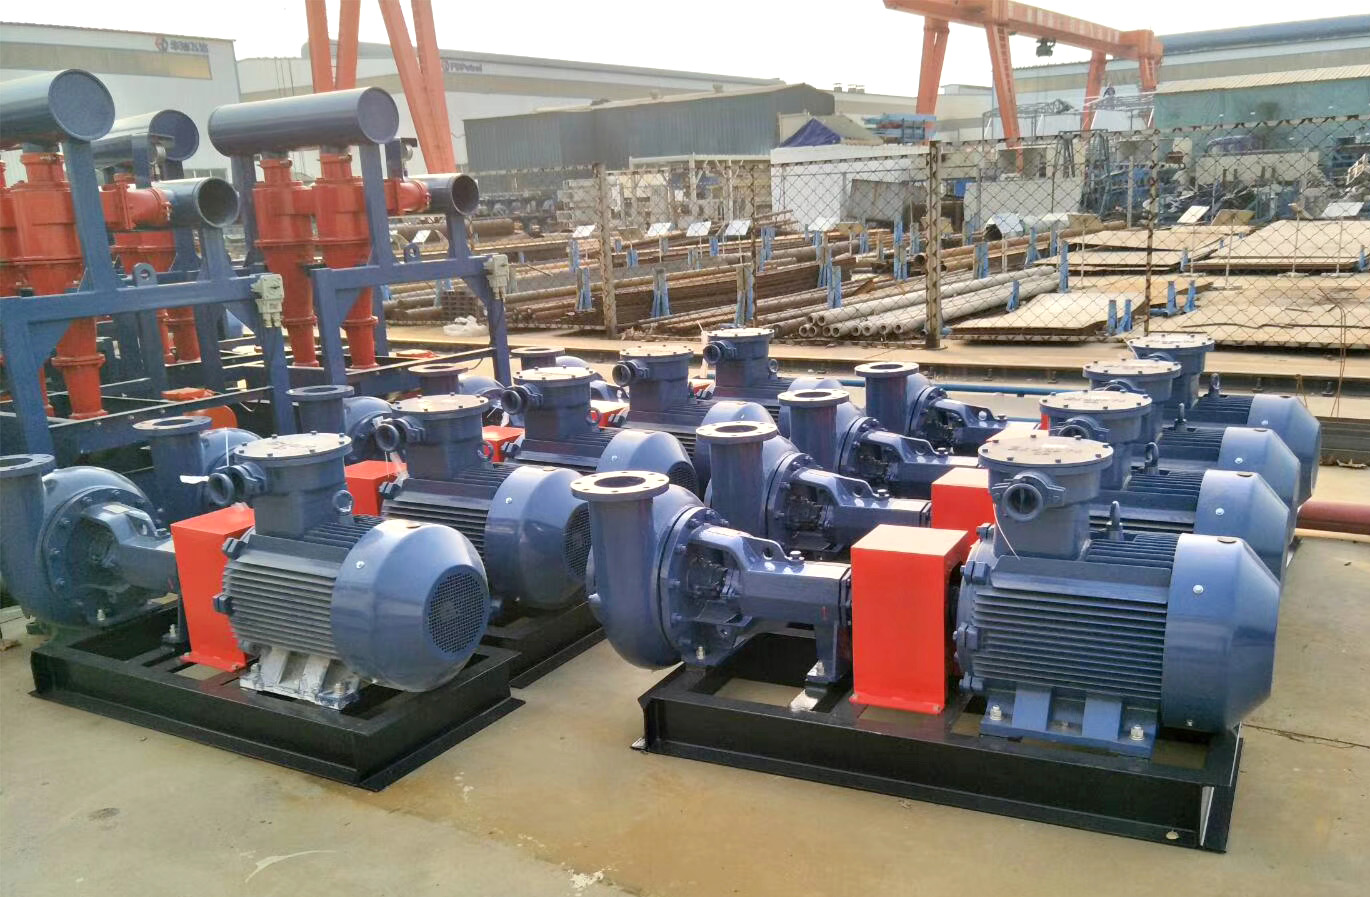 Solids control equipment for oilfiled service company(图1)